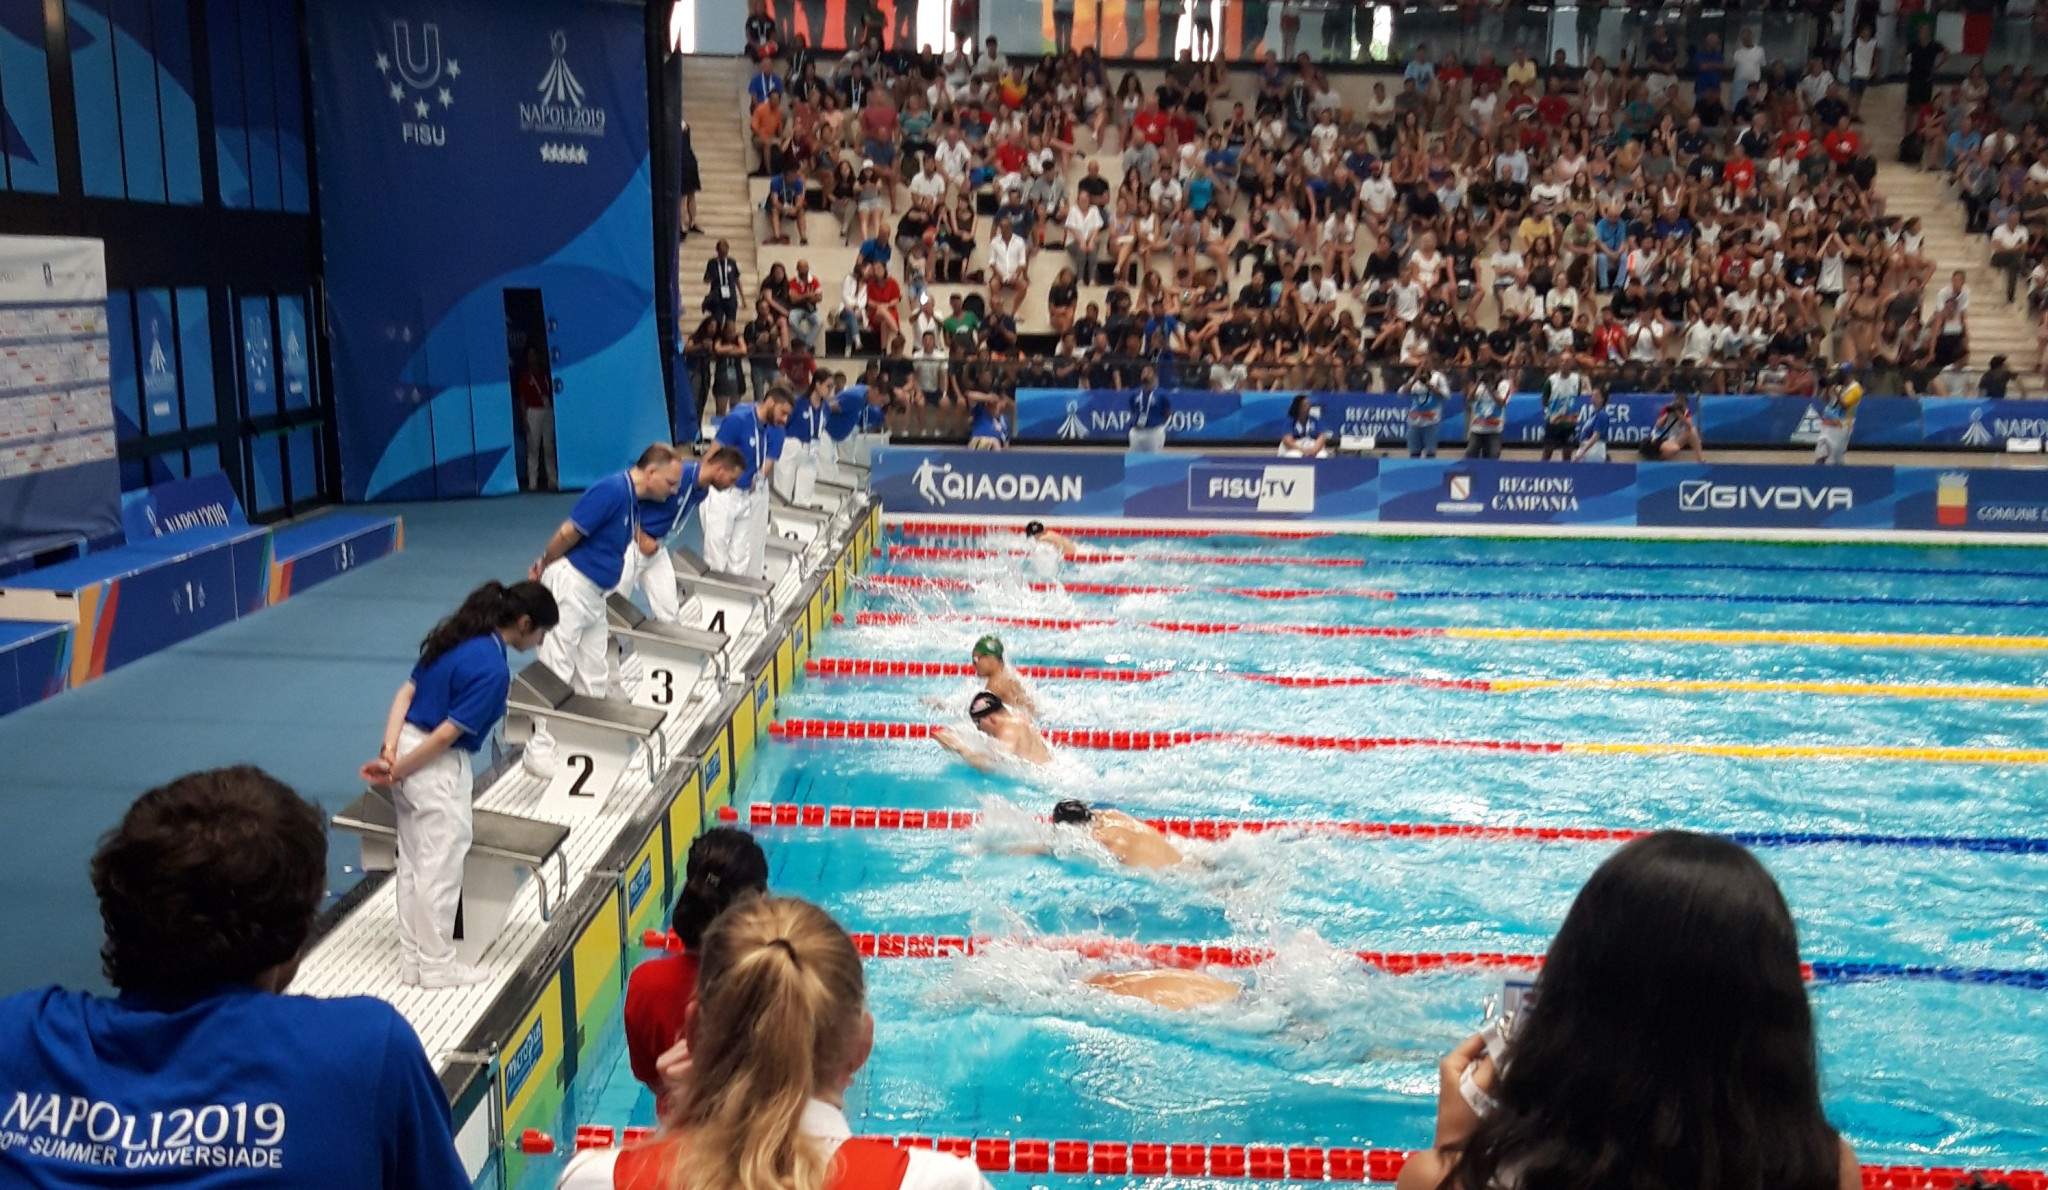 Piscina Scandone hosted an action-packed evening of swimming finals ©ITG